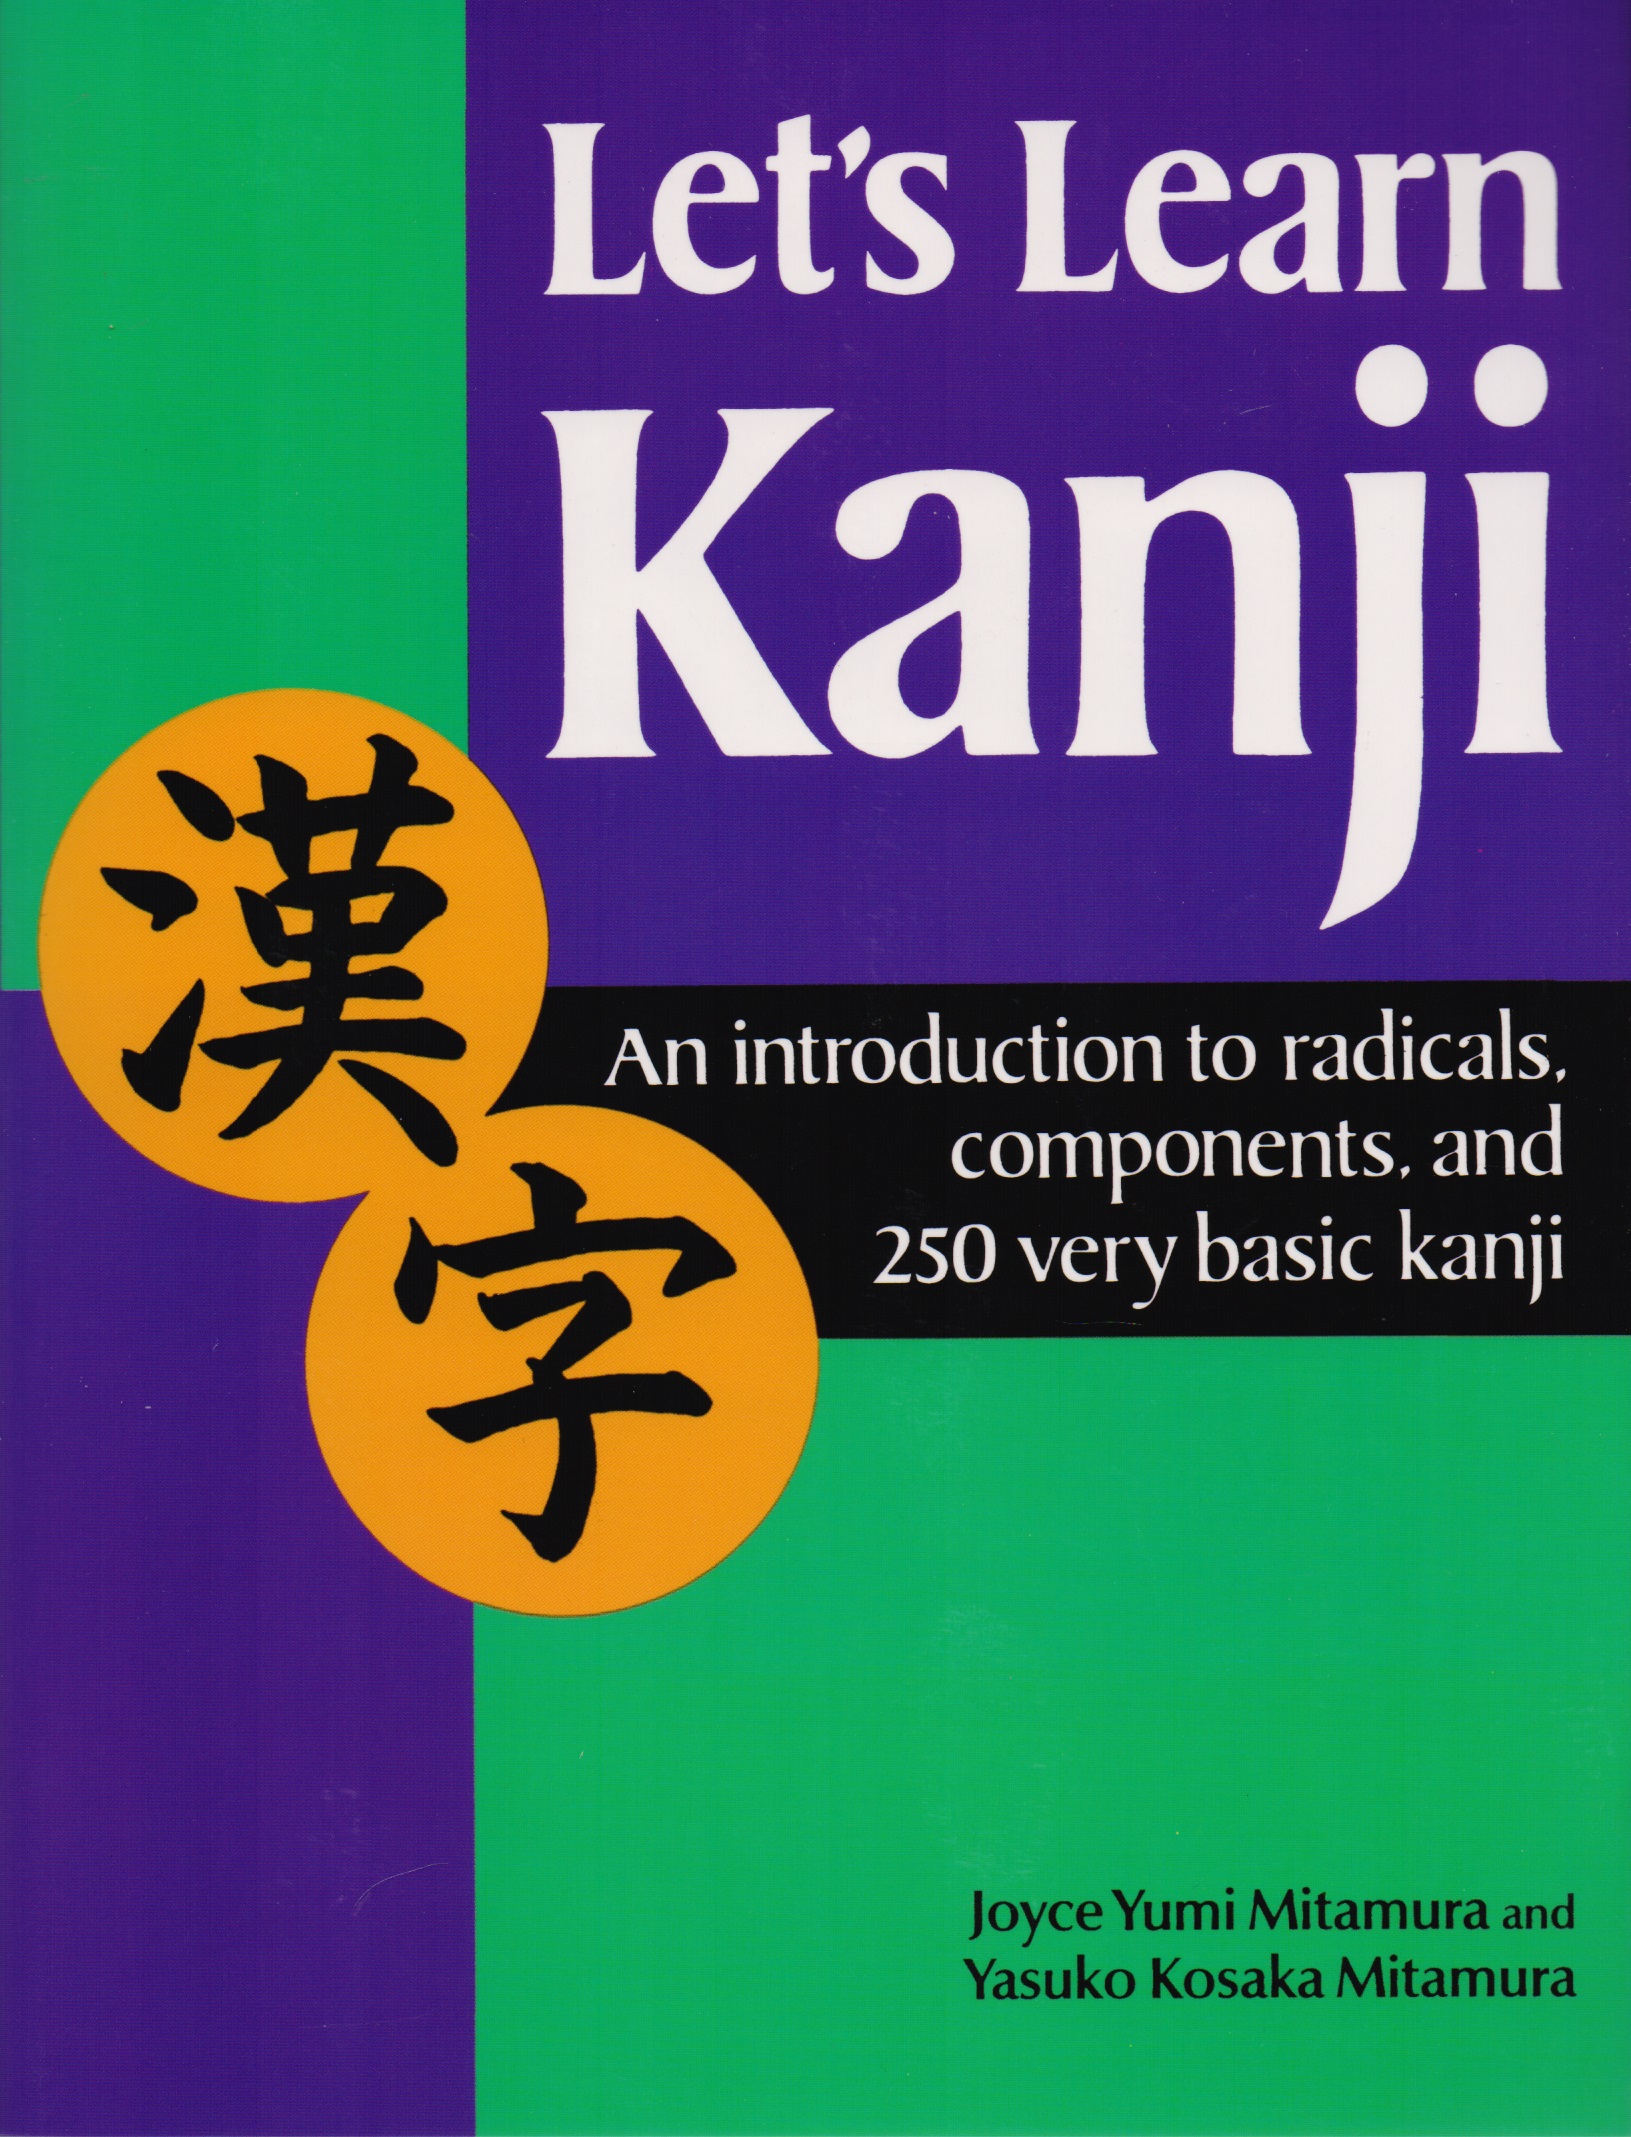 Lets Learn Kanji: An Introduction to Radicals, Components and 250 Very Basic Kanji  change learn to love it learn to lead it